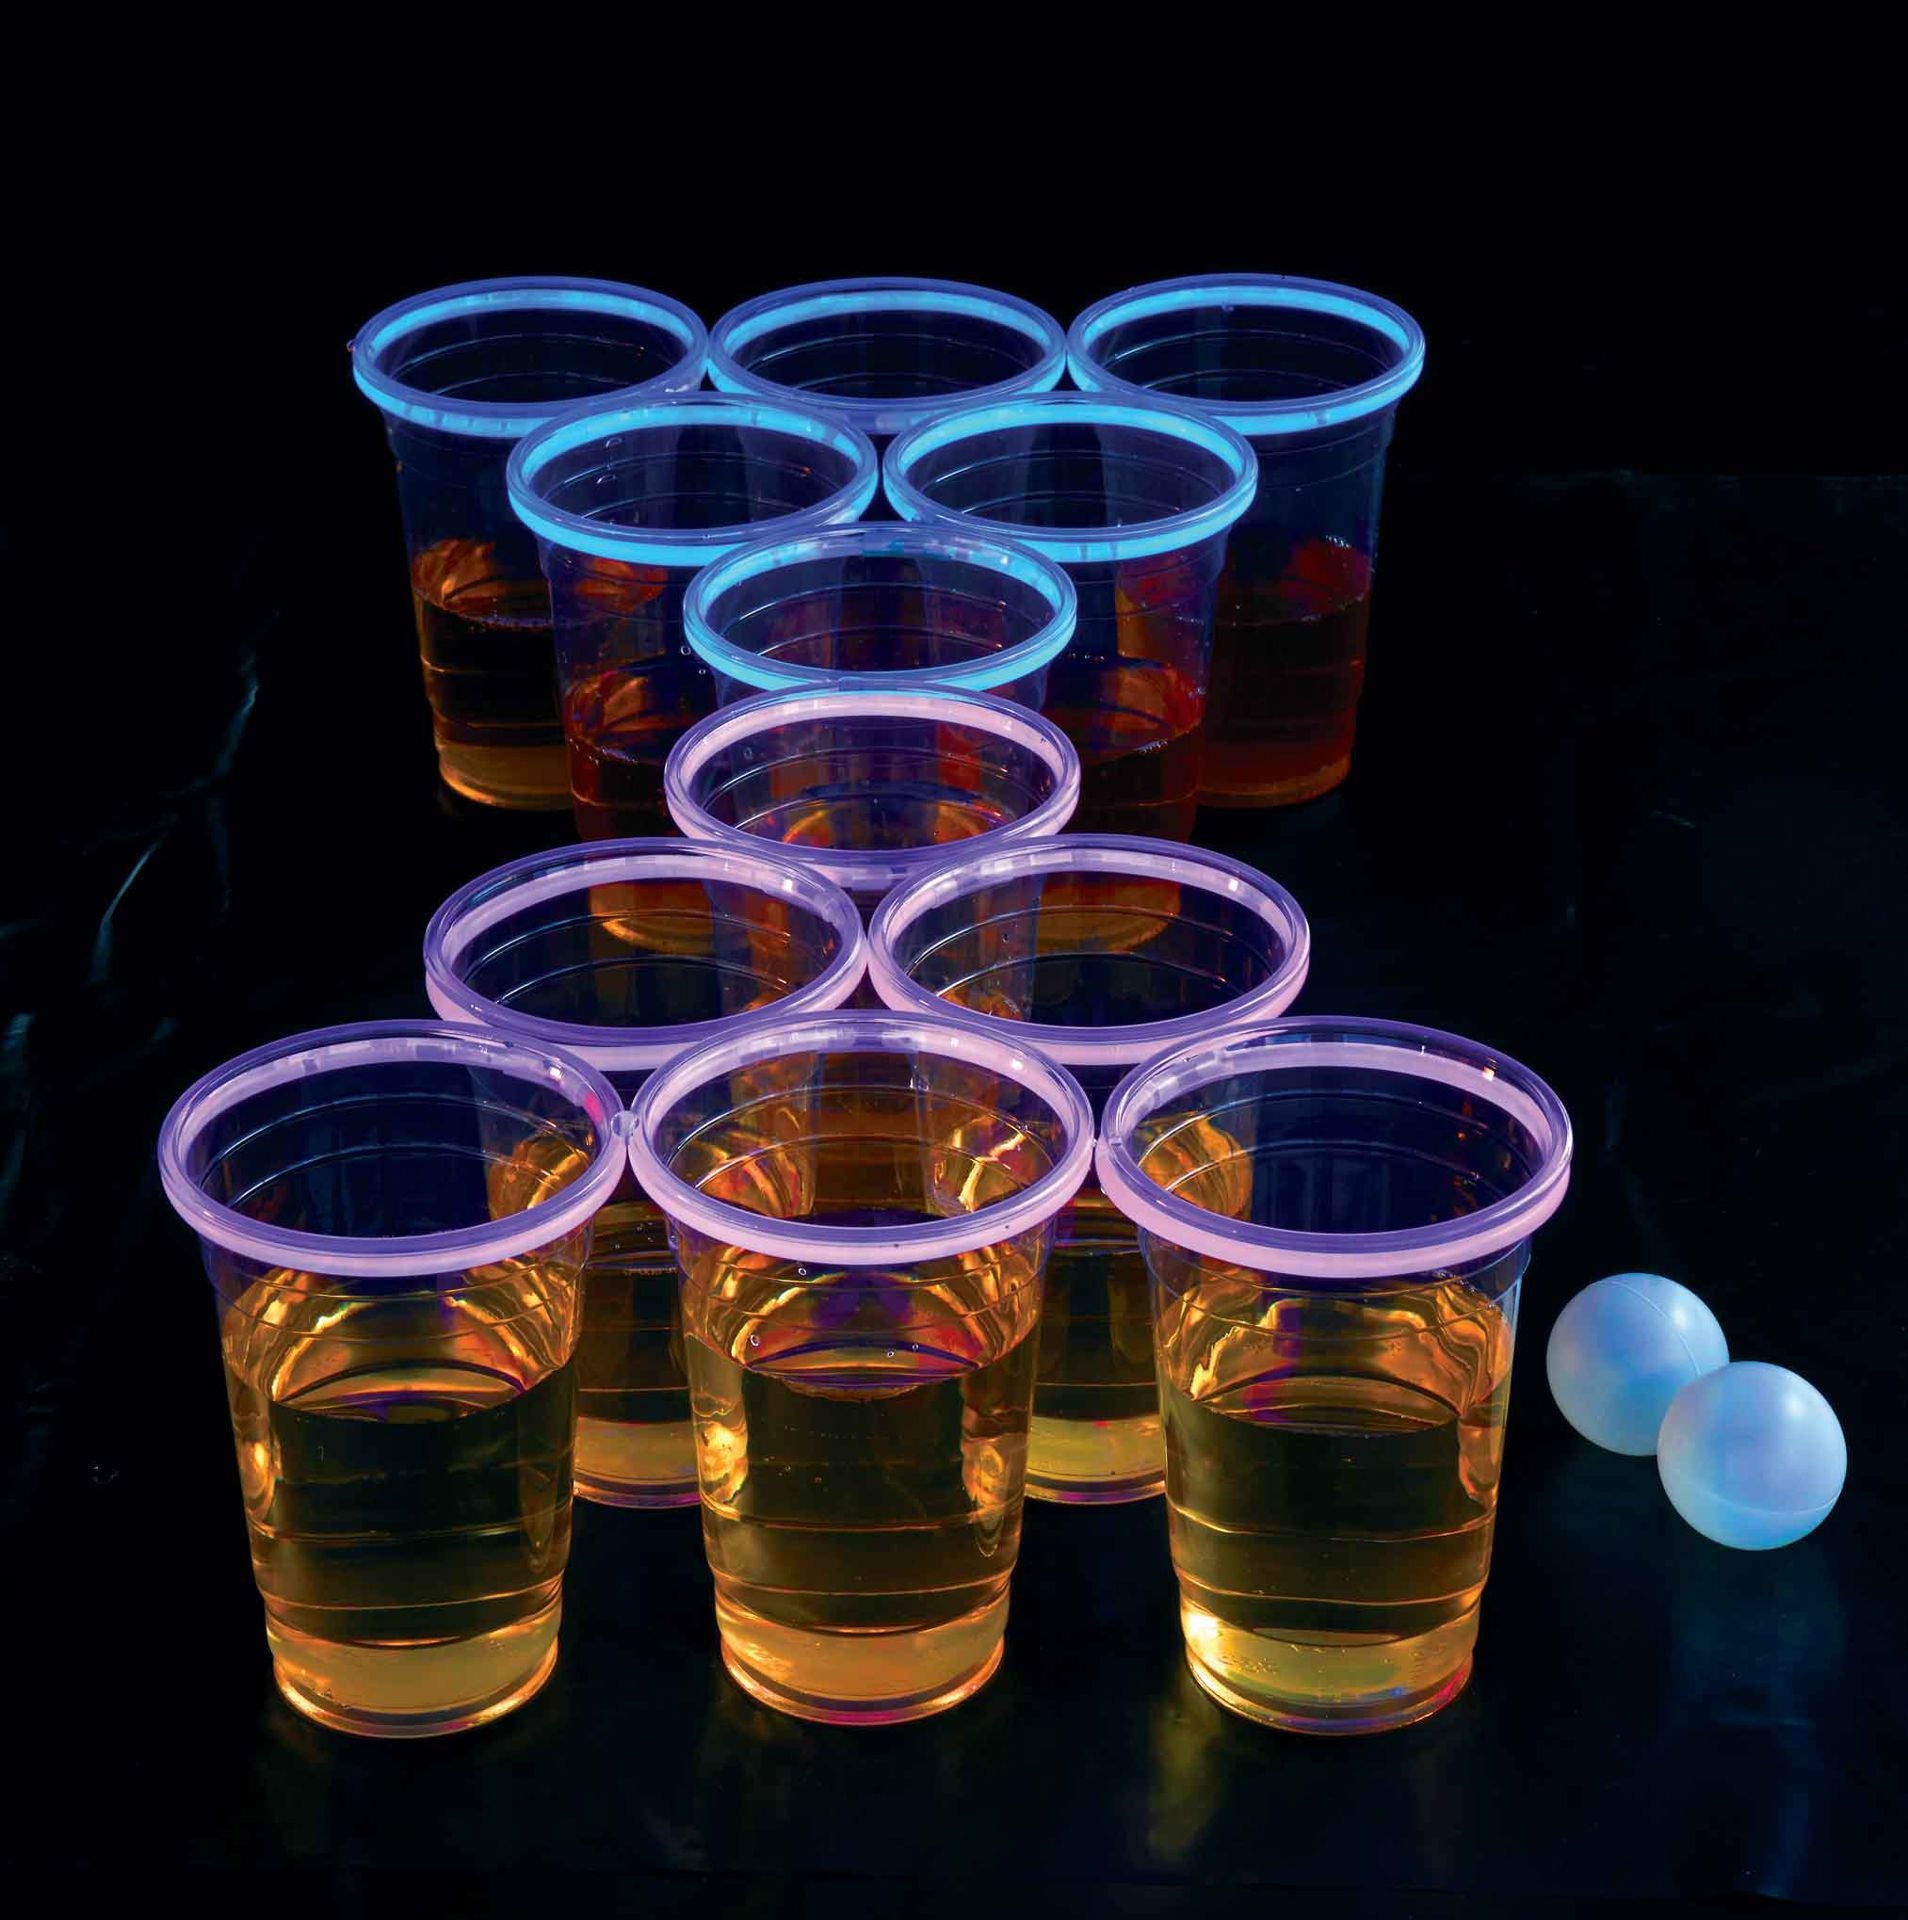 Drinking Game Glowing Fluorescent Beer Pong Kit